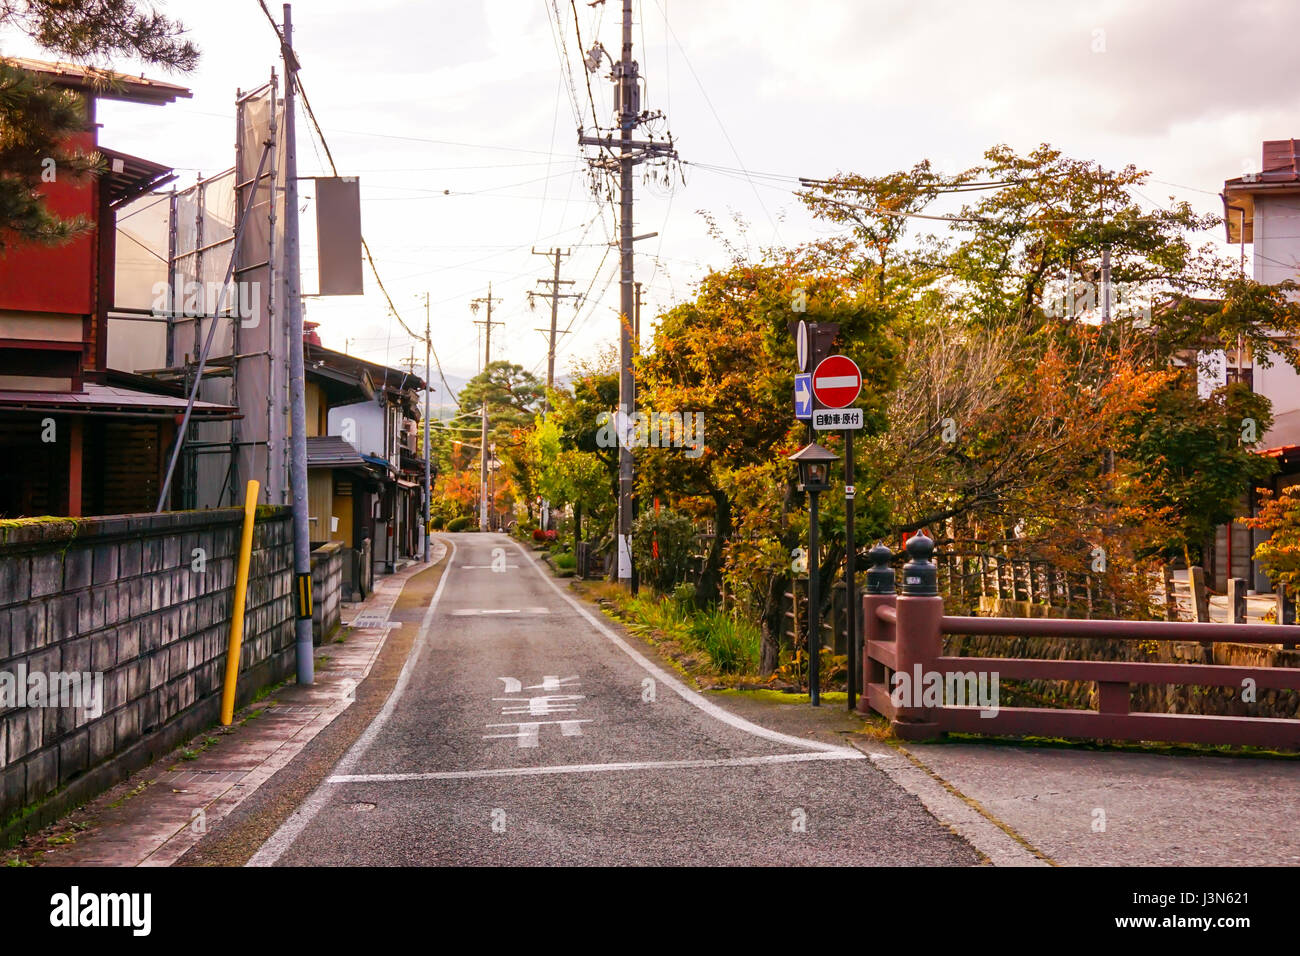 Street junction in Japan country side Stock Photo